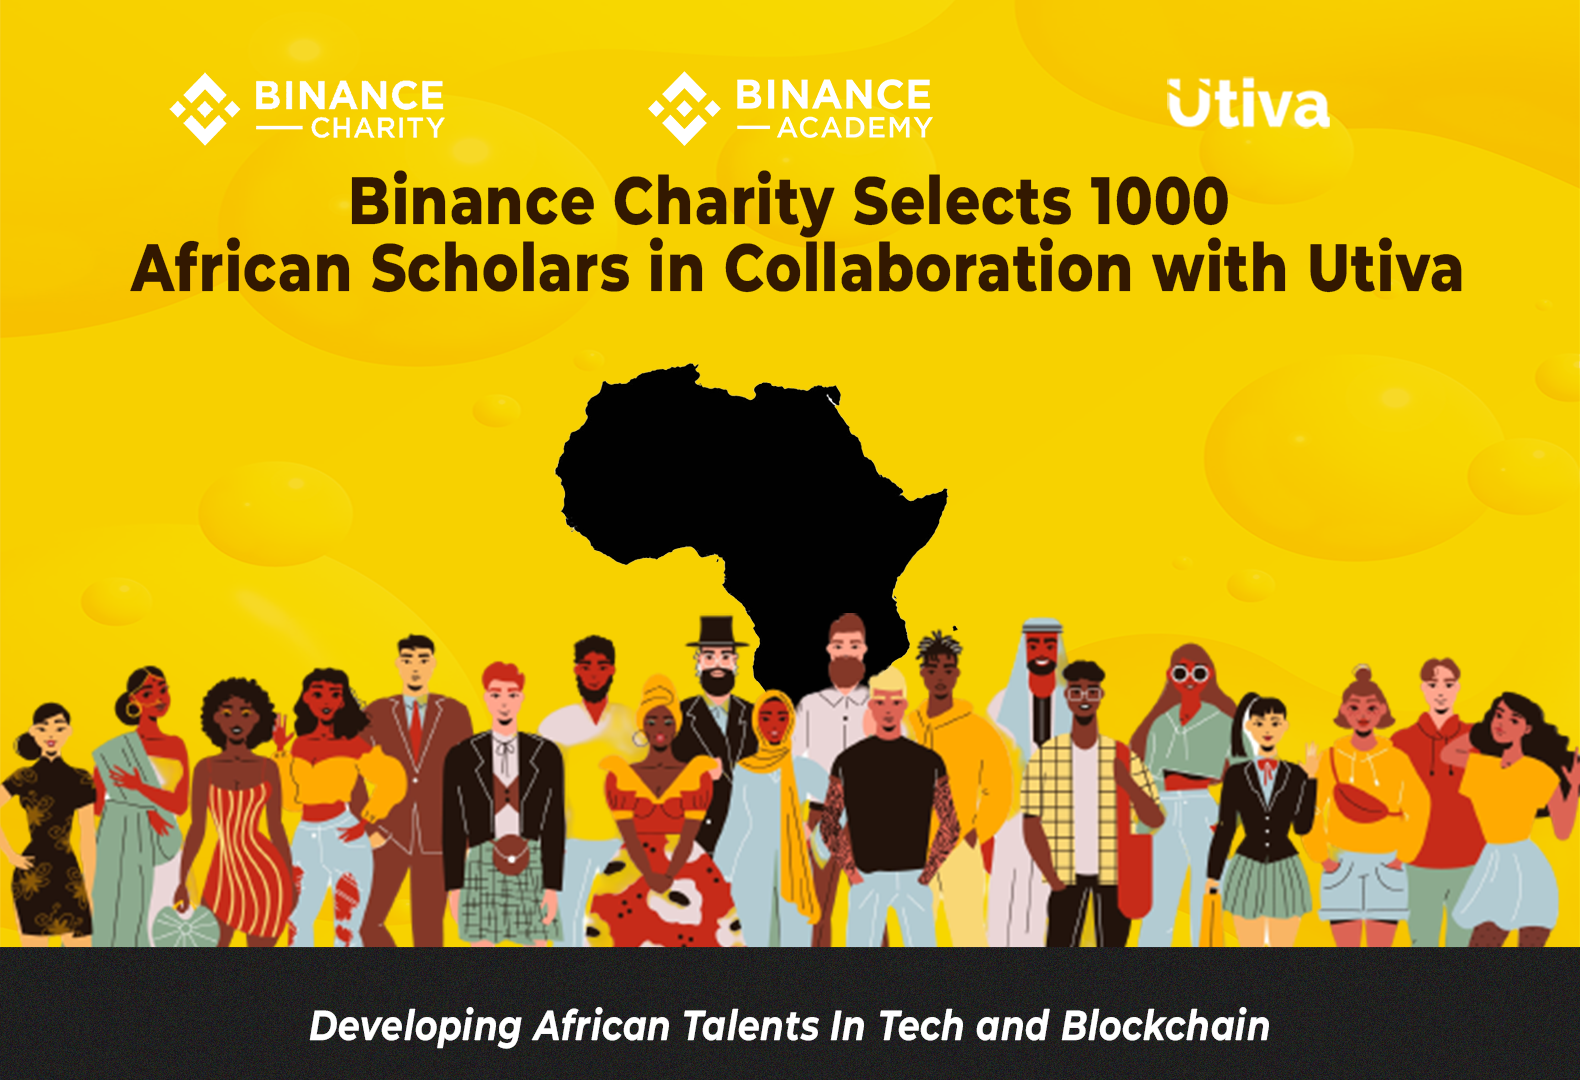 Binance Charity selects 1000 Africans for tech scholarship in collaboration with Utiva